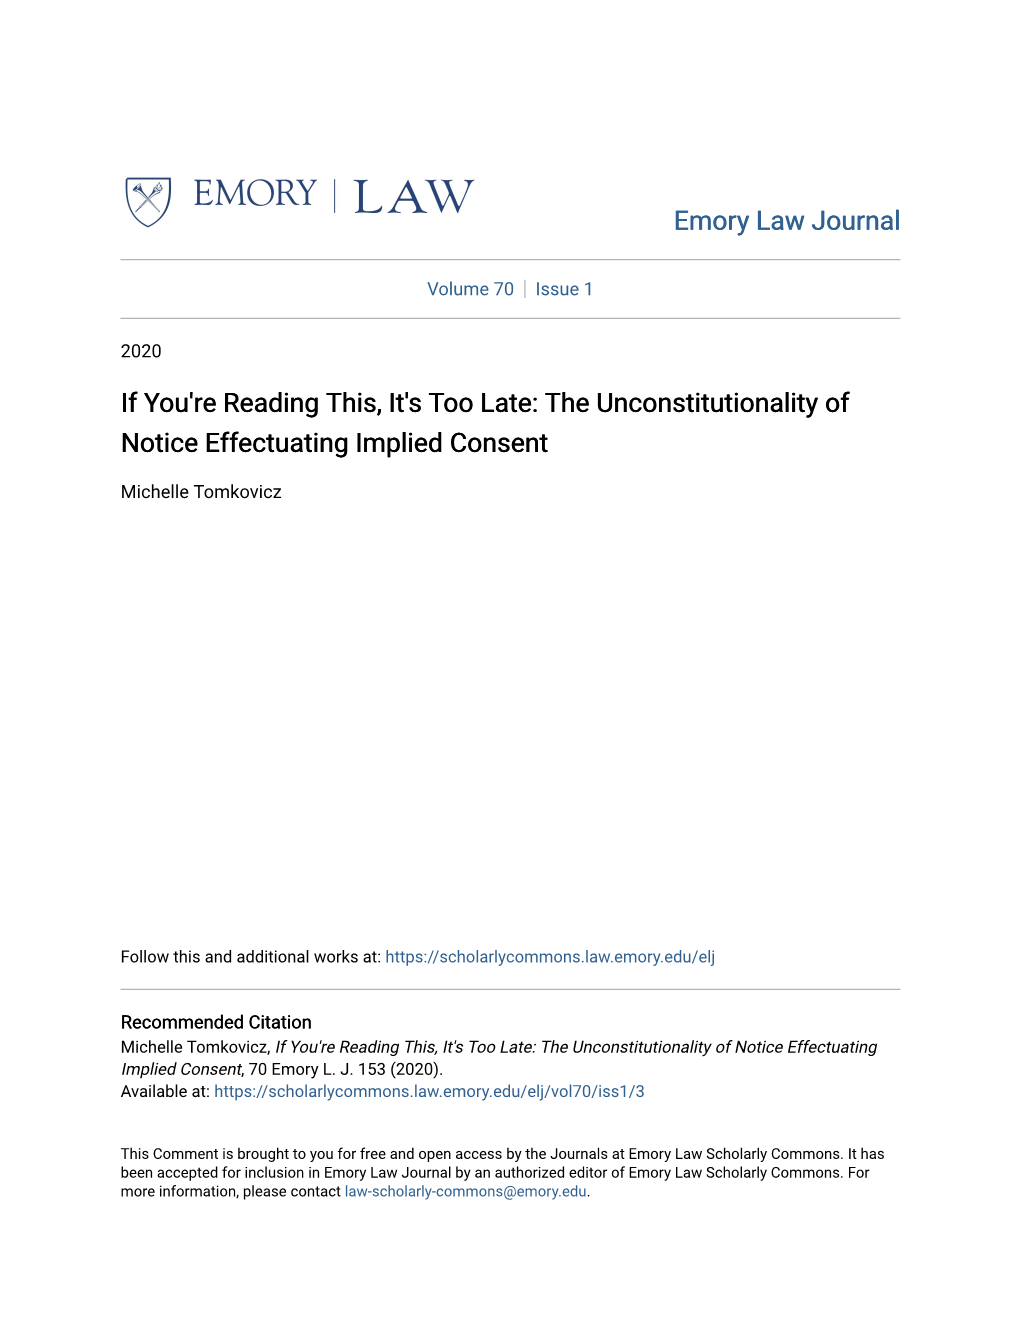 The Unconstitutionality of Notice Effectuating Implied Consent